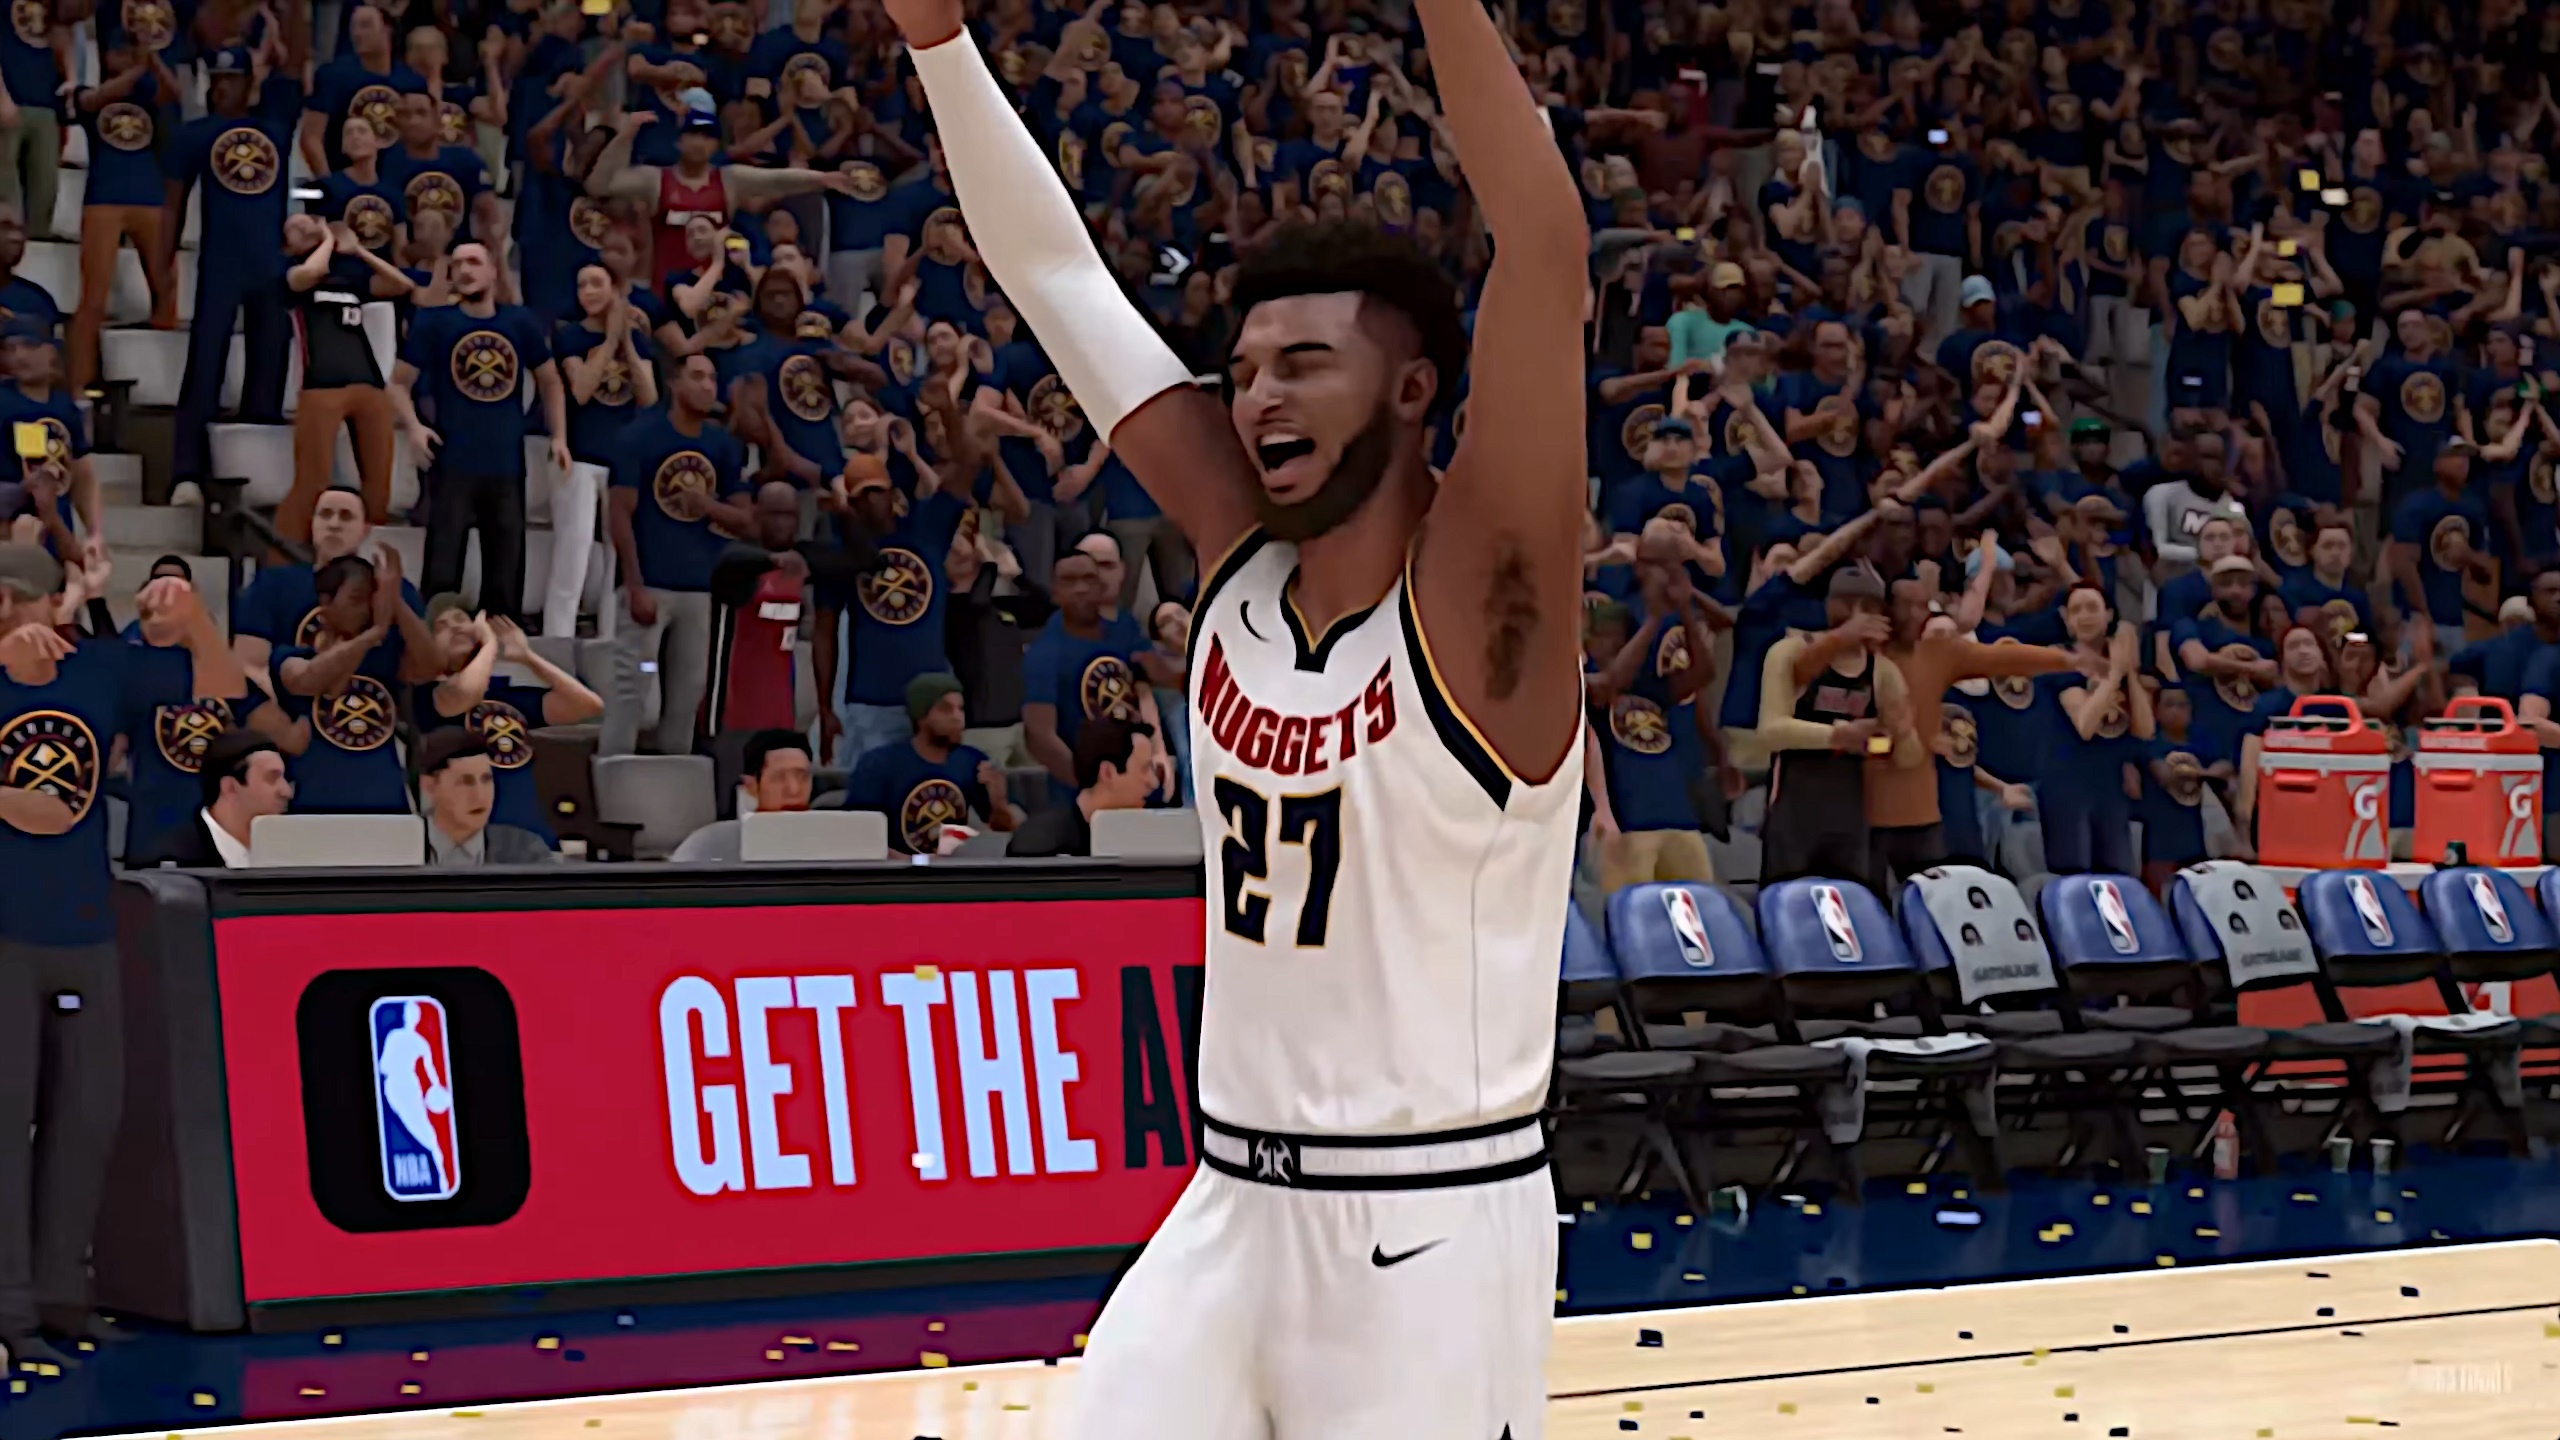 A digital representation of Jamal Murray in his Nuggets 27 jersey is running down a basketball court with his arms raised in celebration